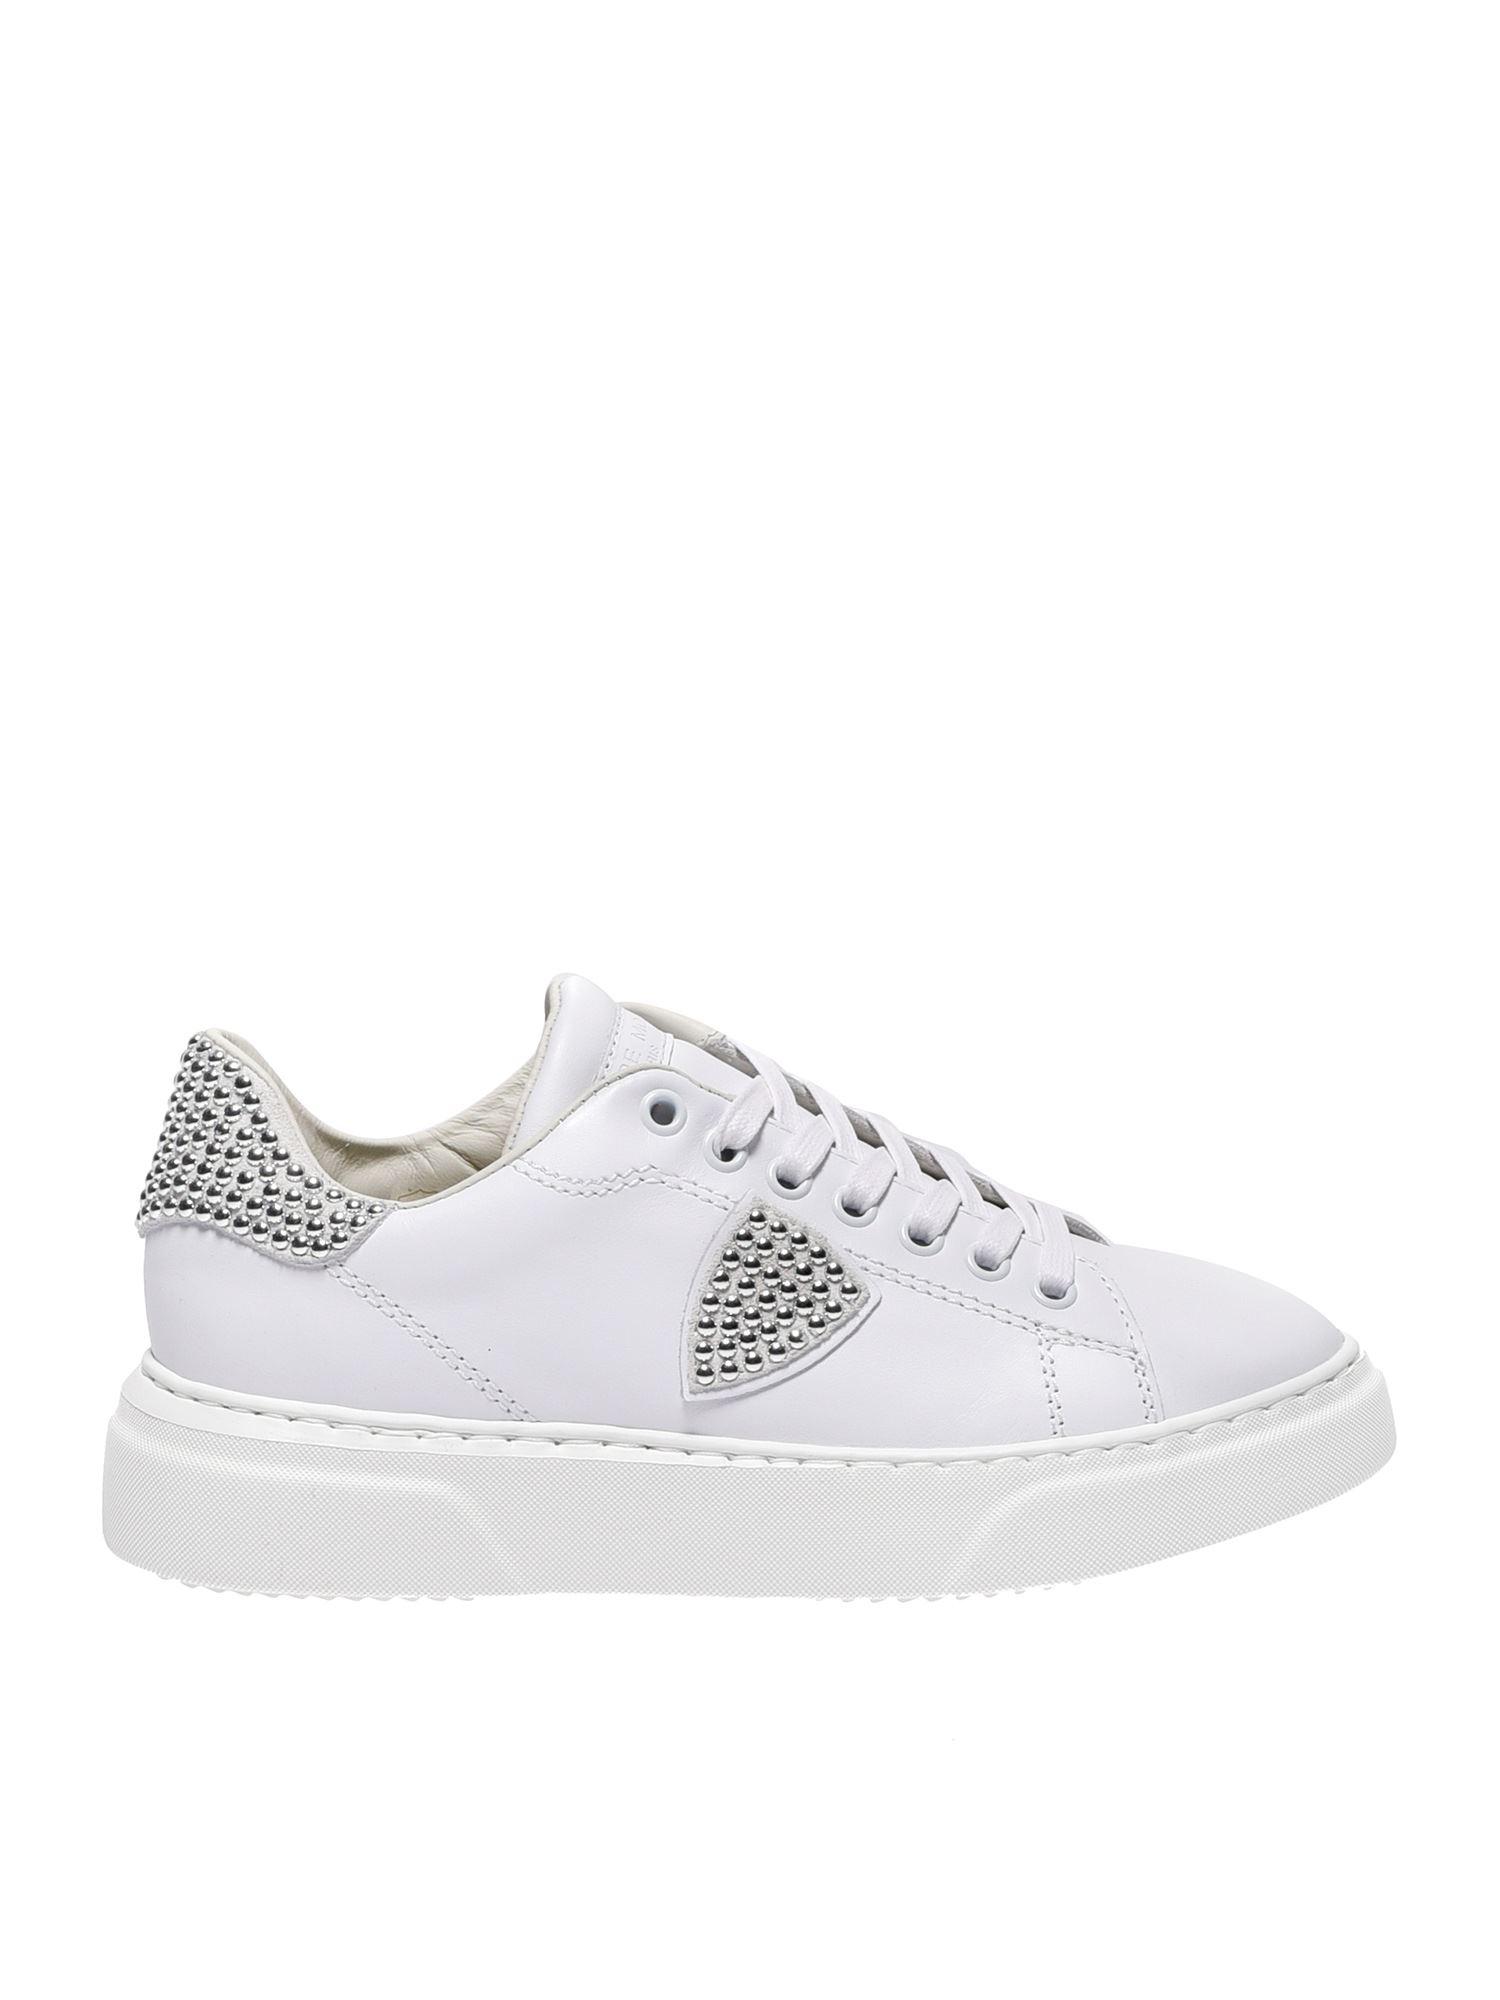 Philippe Model Leather White Studded Temple Sneakers - Lyst